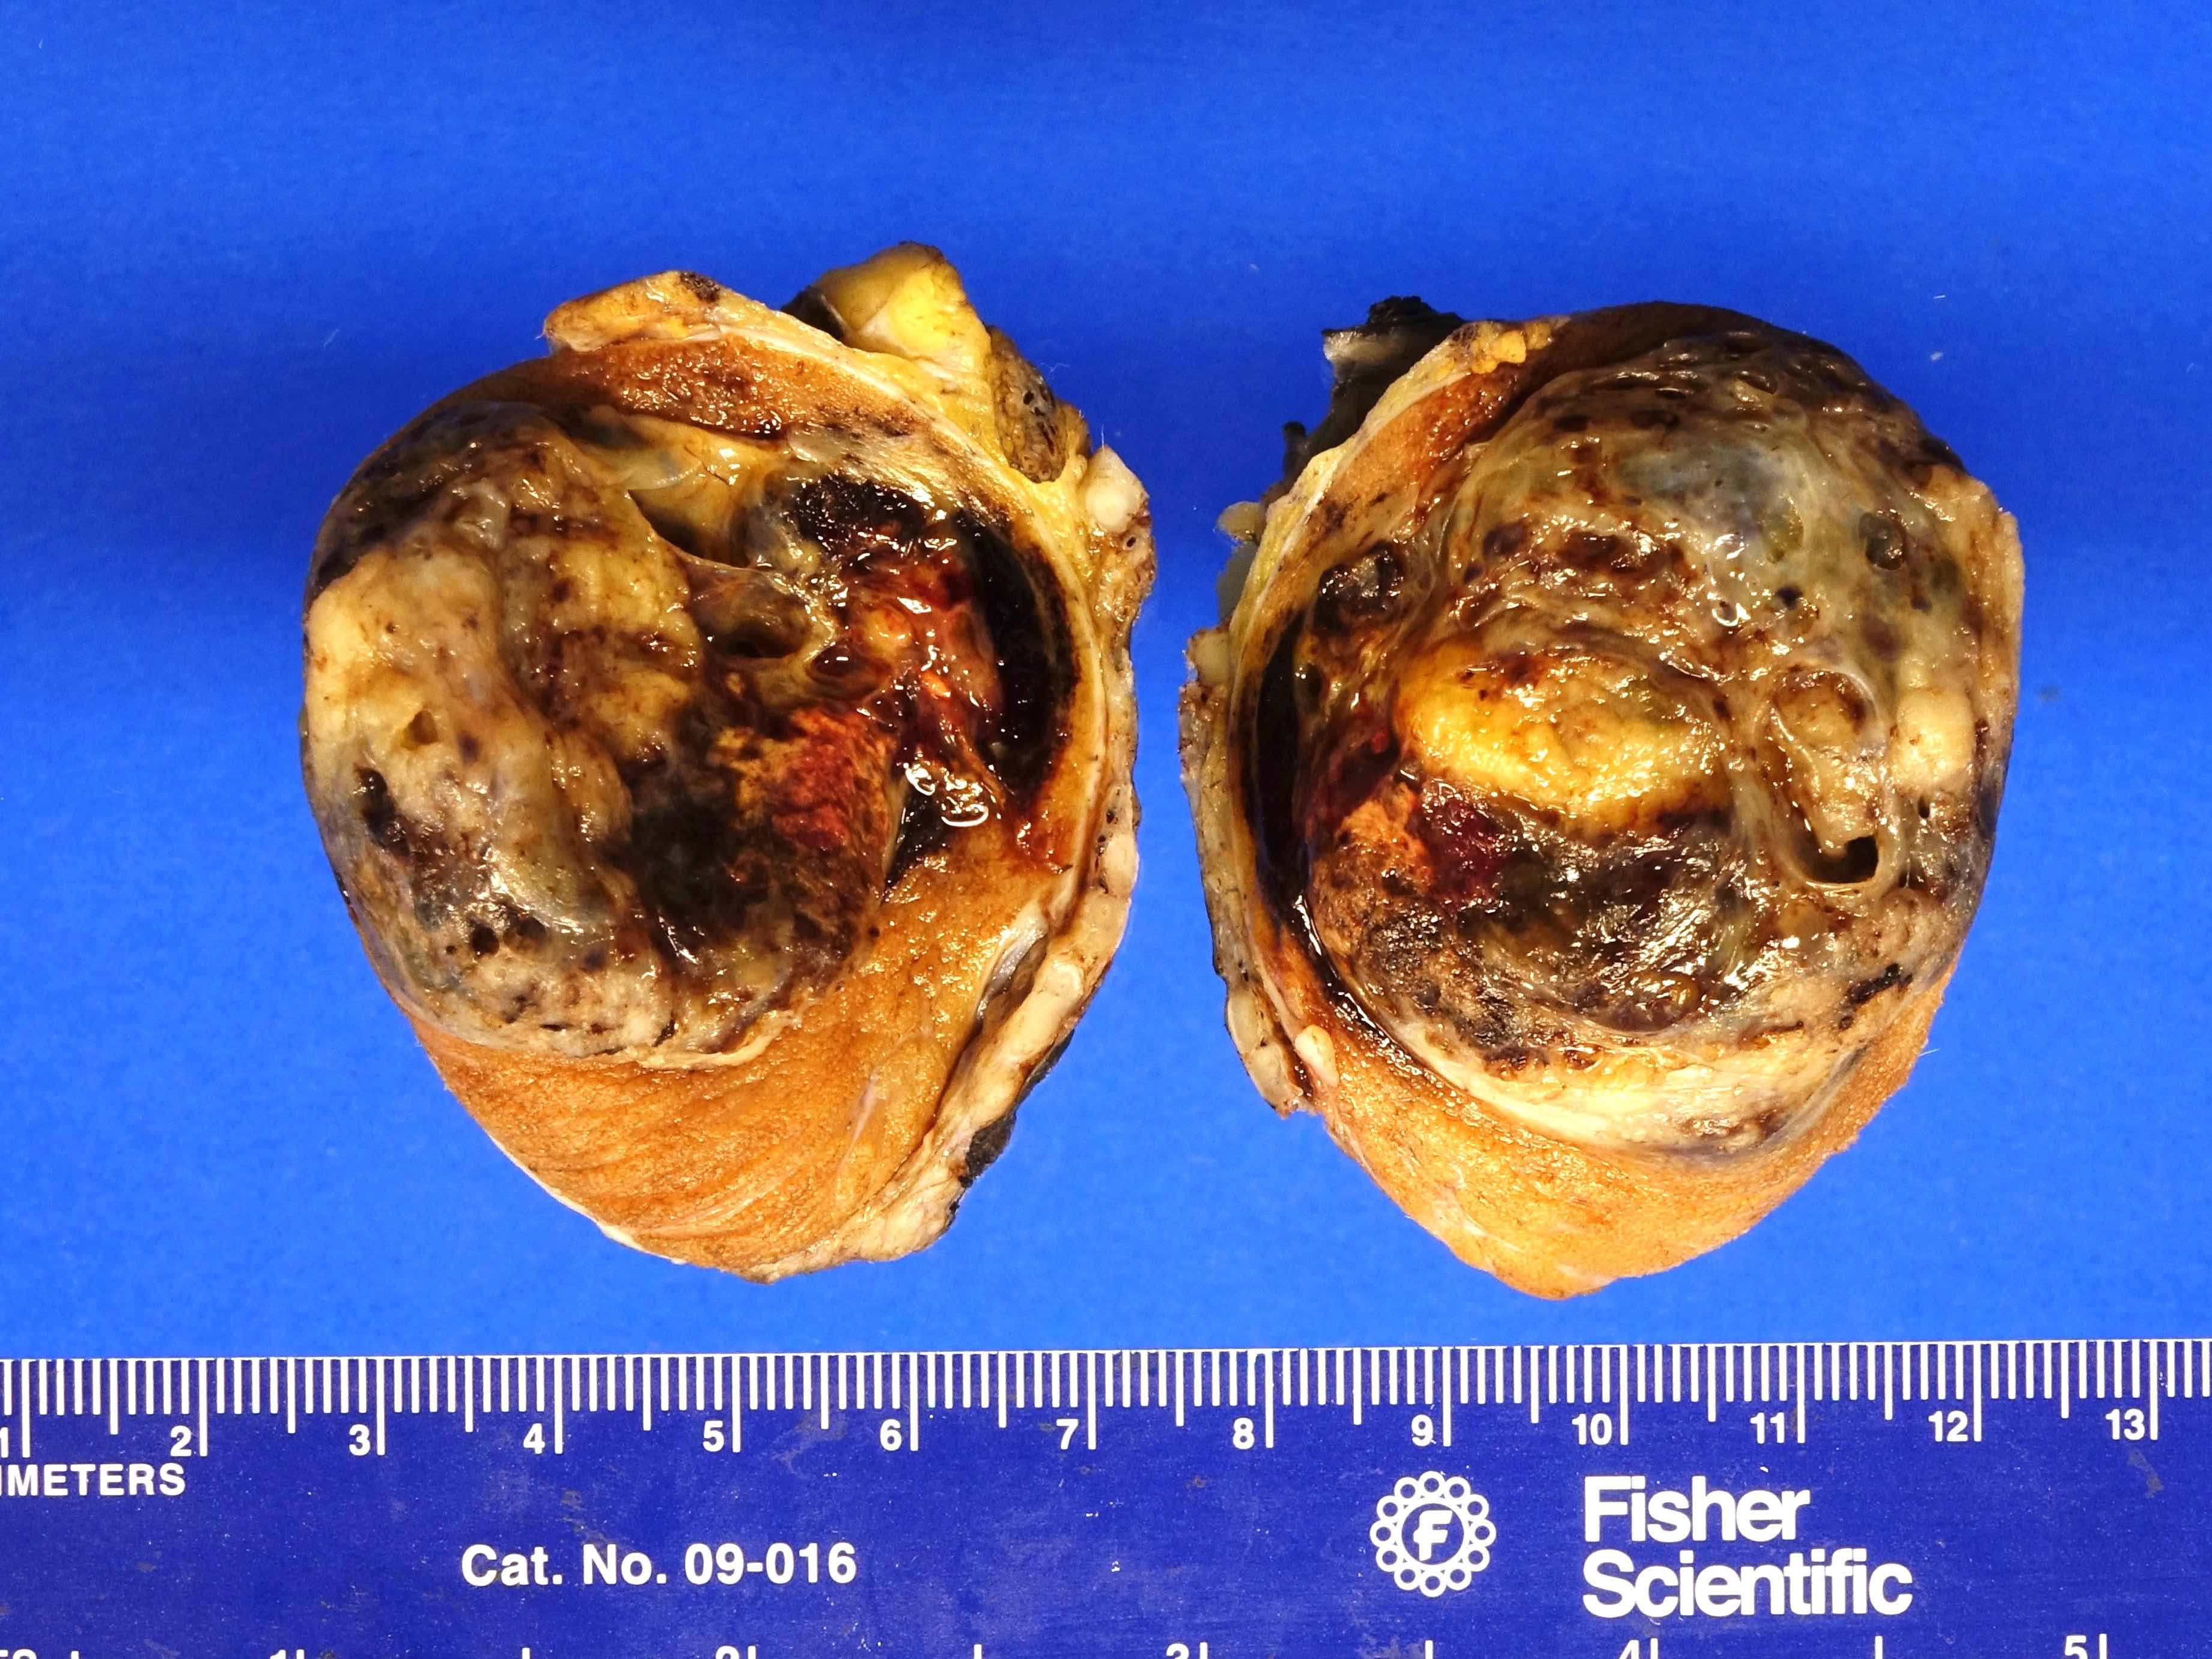 Mixed GCT with minor component of choriocarcinoma